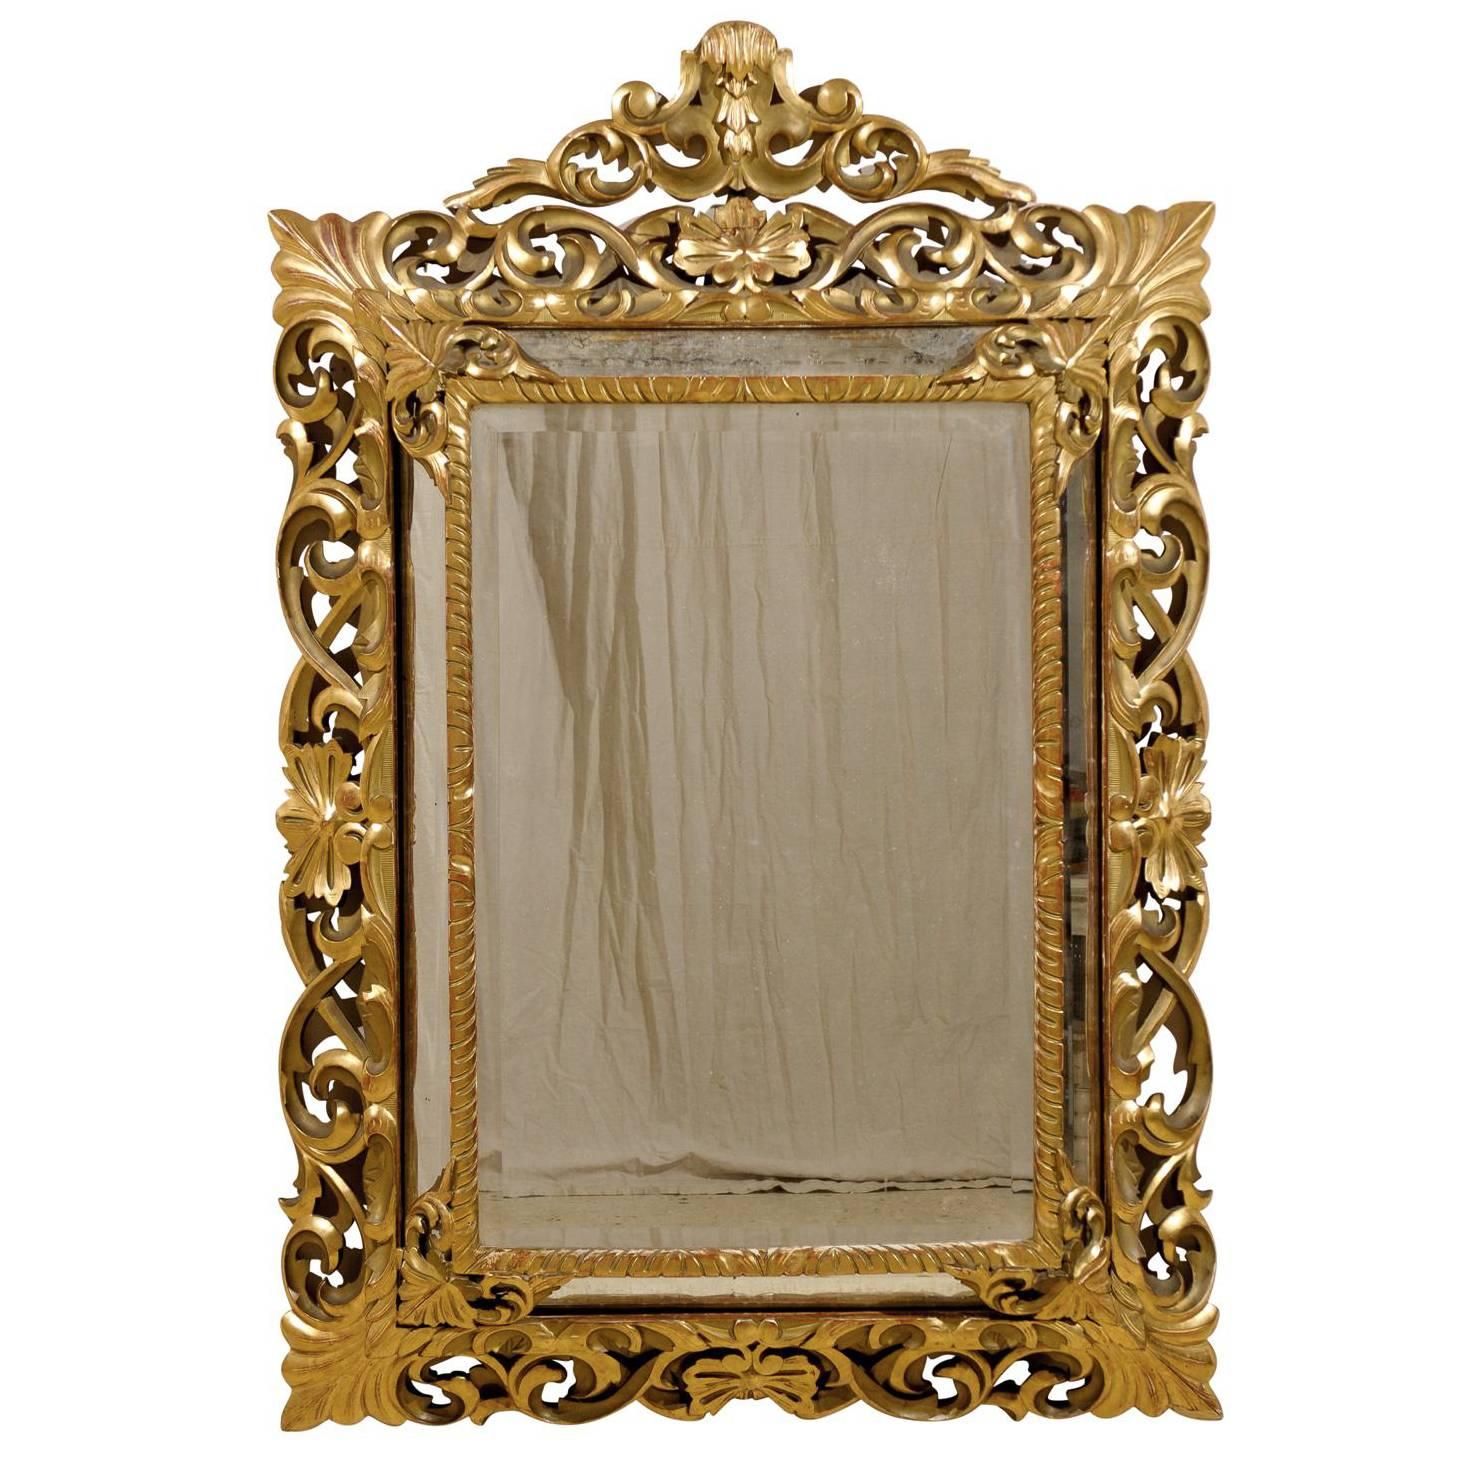 An Italian 19th Century Gilt Wood Mirror with Ornate Foliage Decor, Gold Color For Sale